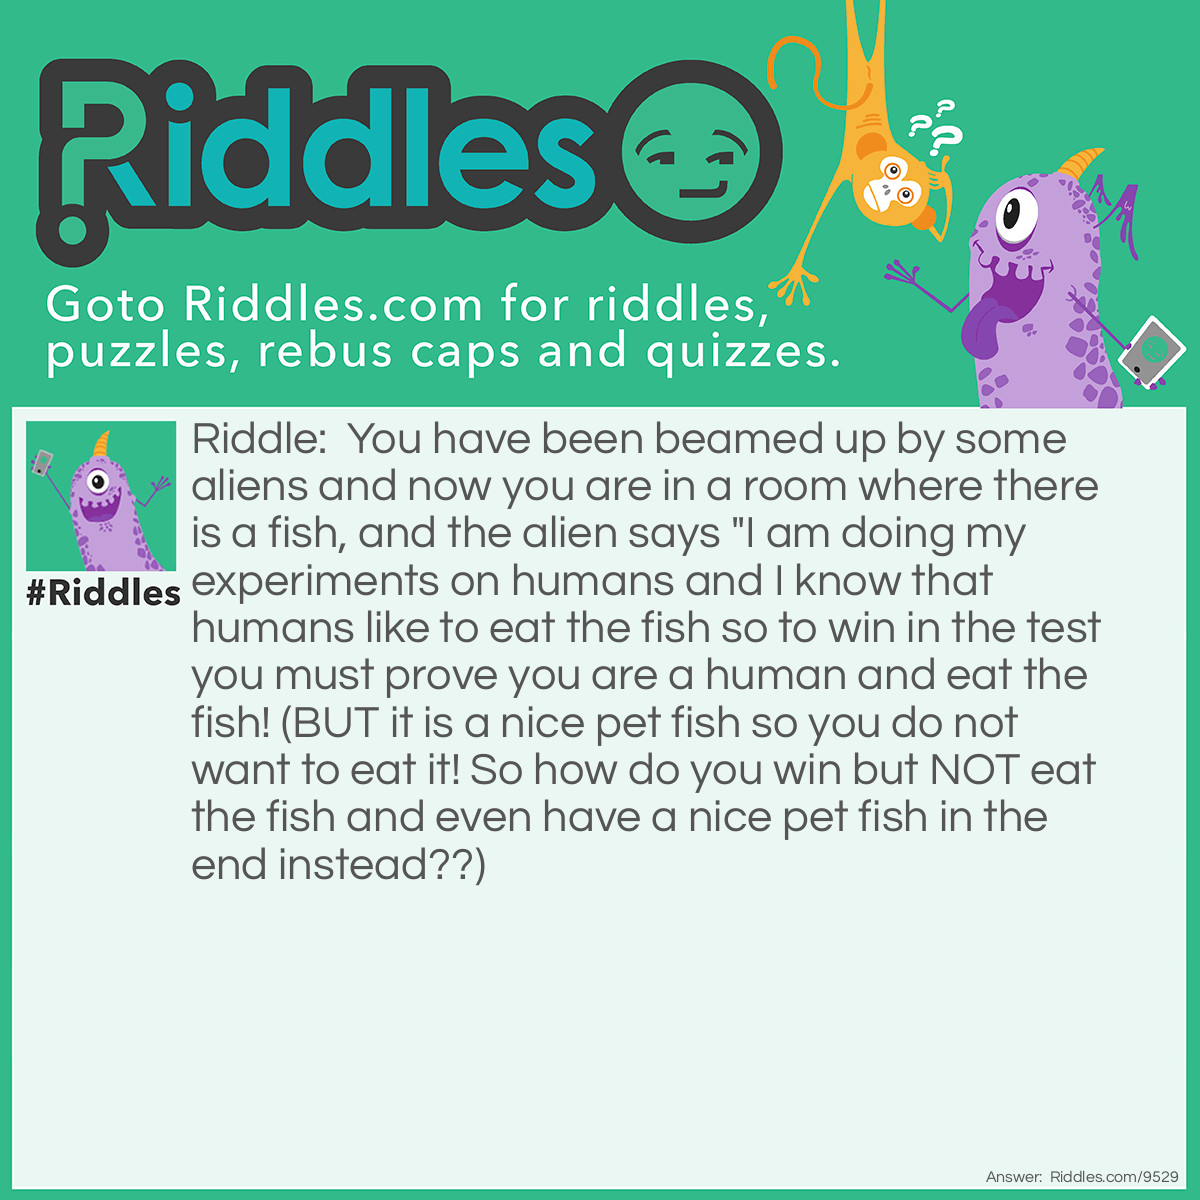 Riddle: You have been beamed up by some aliens and now you are in a room where there is a fish, and the alien says "I am doing my experiments on humans and I know that humans like to eat the fish so to win in the test you must prove you are a human and eat the fish! (BUT it is a nice pet fish so you do not want to eat it! So how do you win but NOT eat the fish and even have a nice pet fish in the end instead??) Answer: You throw the fishtank at the alien, because water is poison for the aliens so it will die and you will win (and the fish is a type of fish that can live on land)